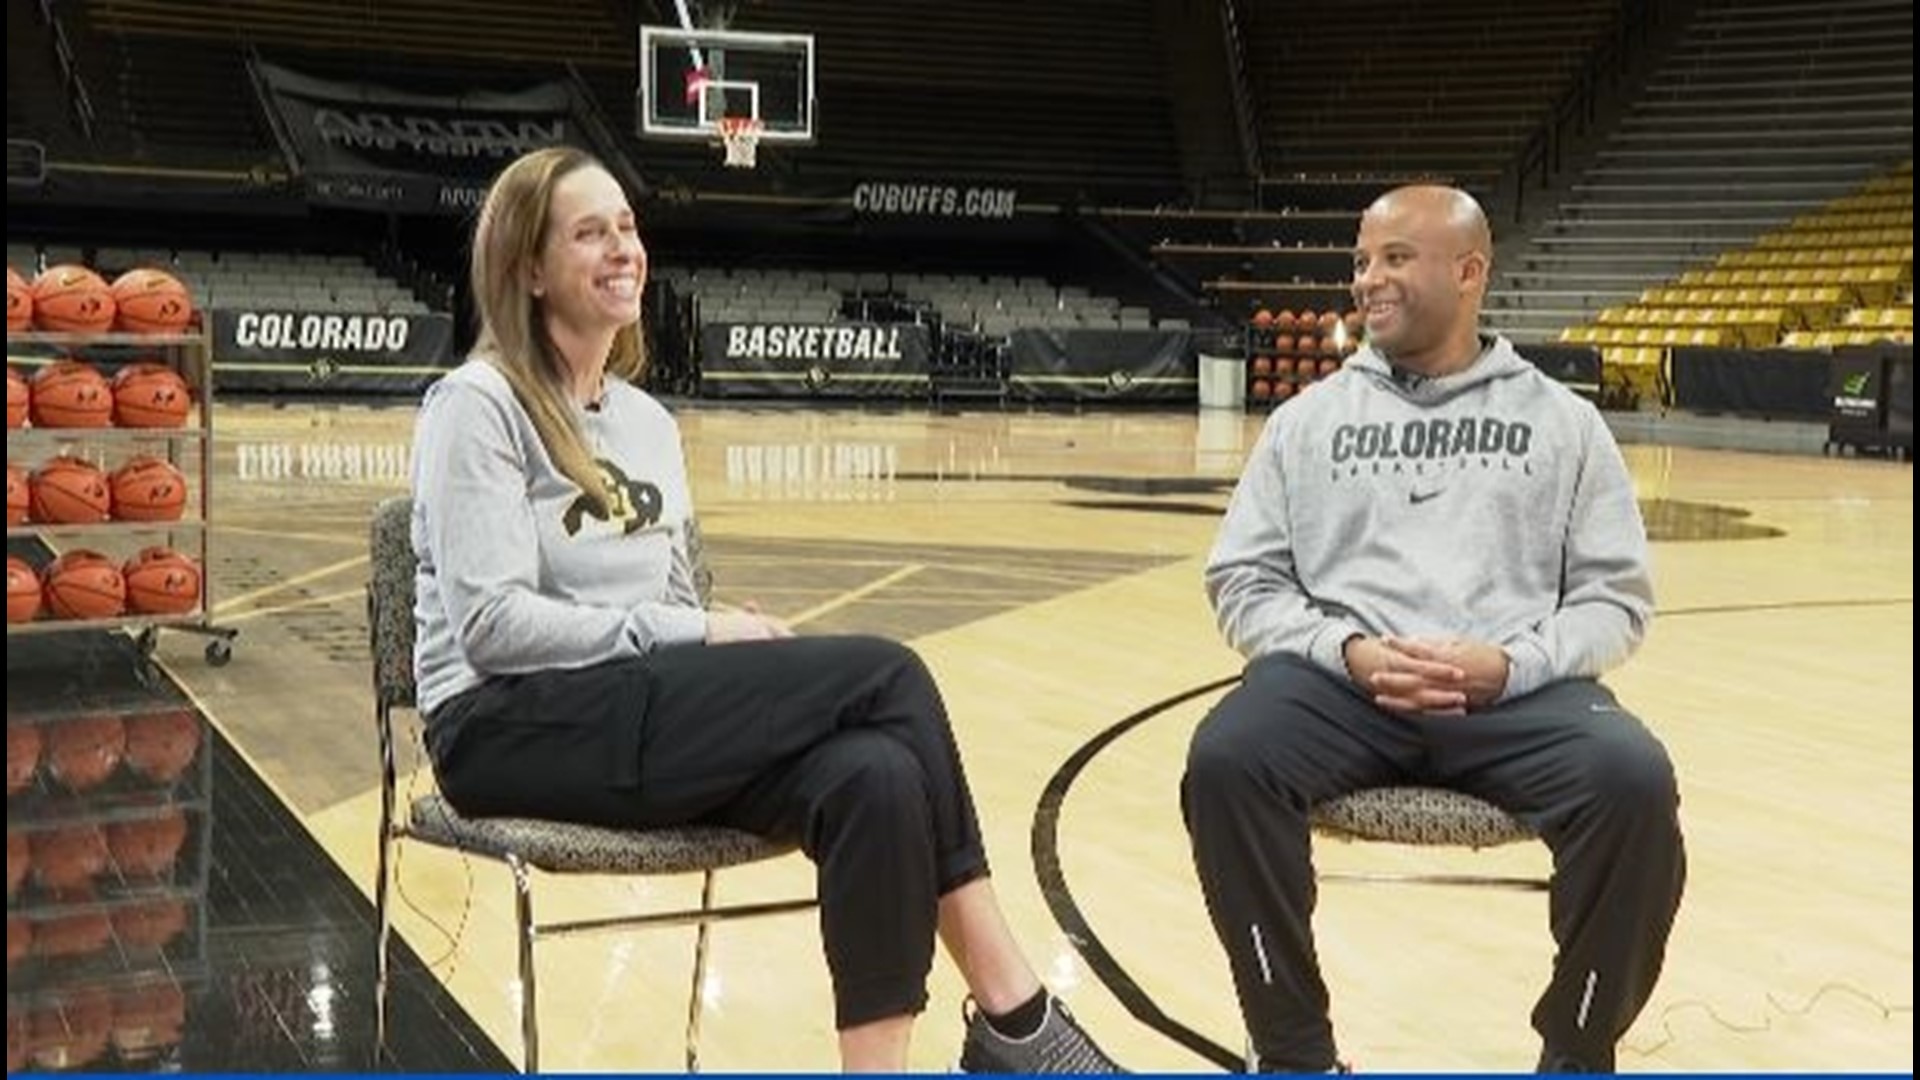 Head coach JR Payne and her husband, associate head coach Toriano Towns, lead the Buffs together with their complimentary coaching and personality styles.